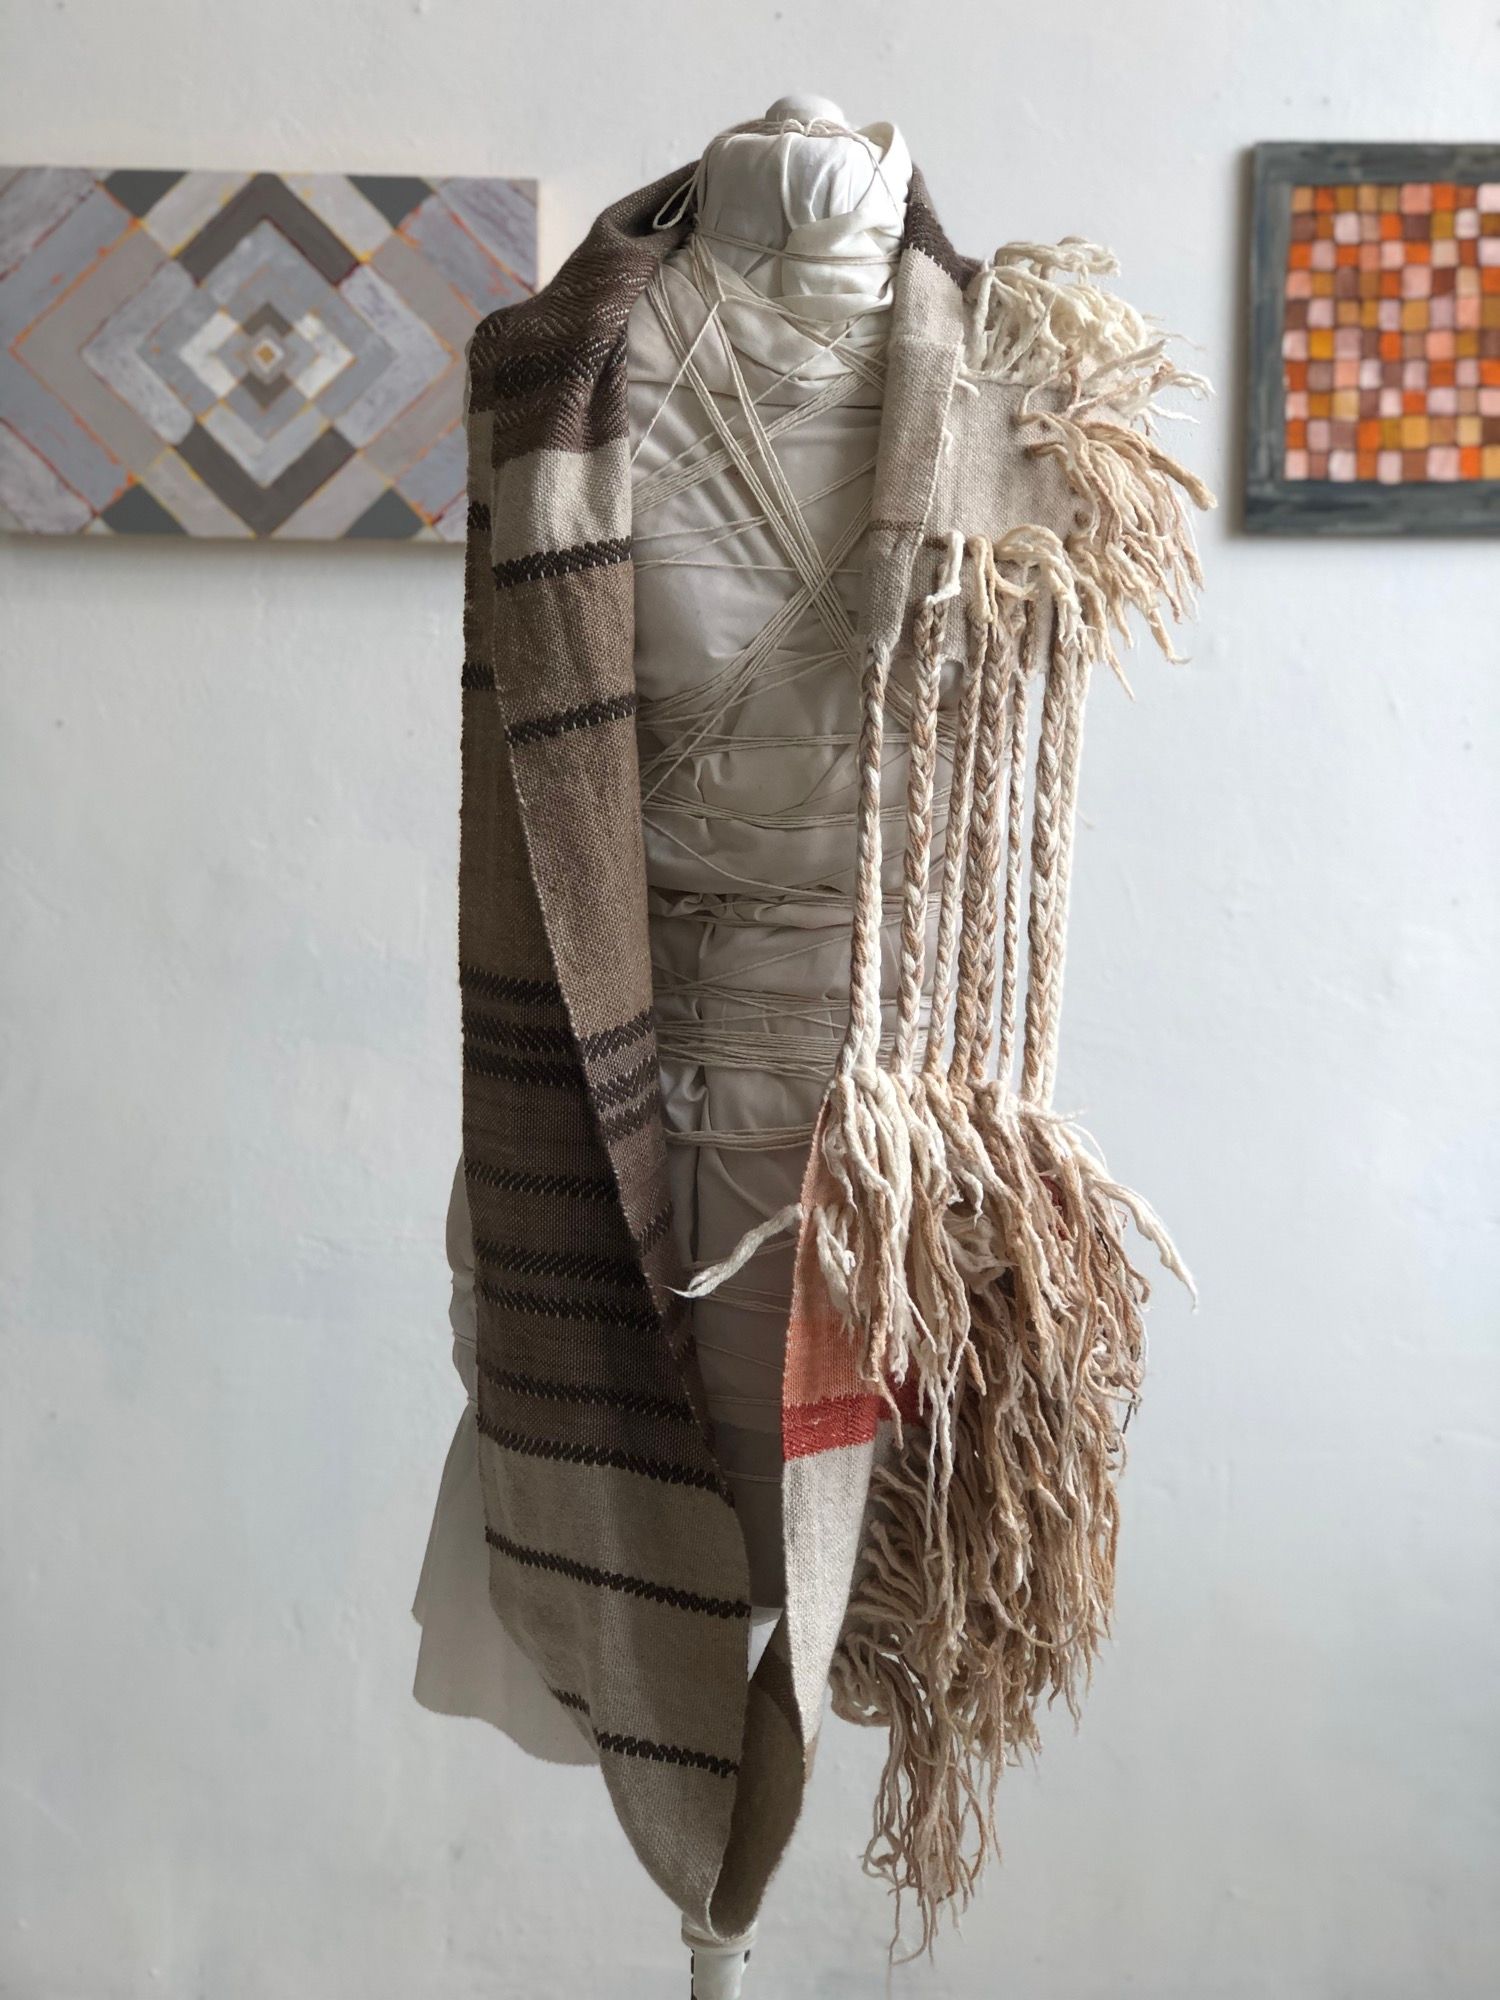 brown, grey, tan and white handwoven cowl scarf with fringe on a white mannequin in a white walled gallery